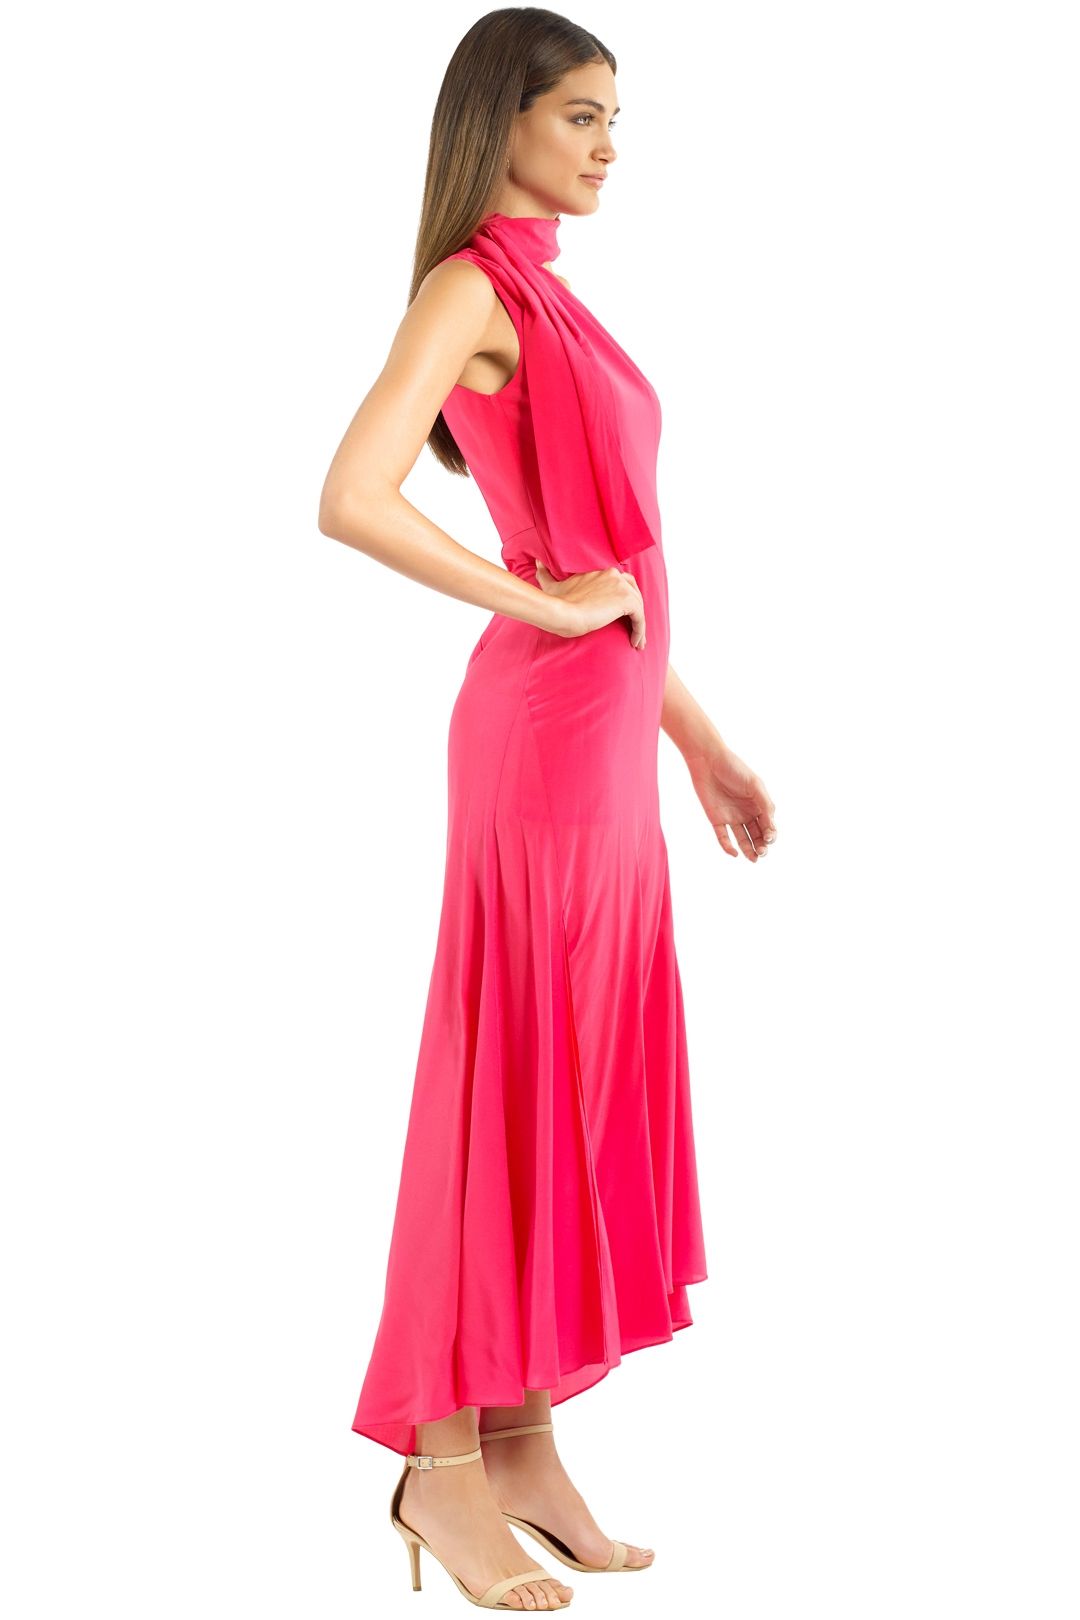 Silk Tie Neck Maxi Dress in Hot Coral by Nicholas for Rent